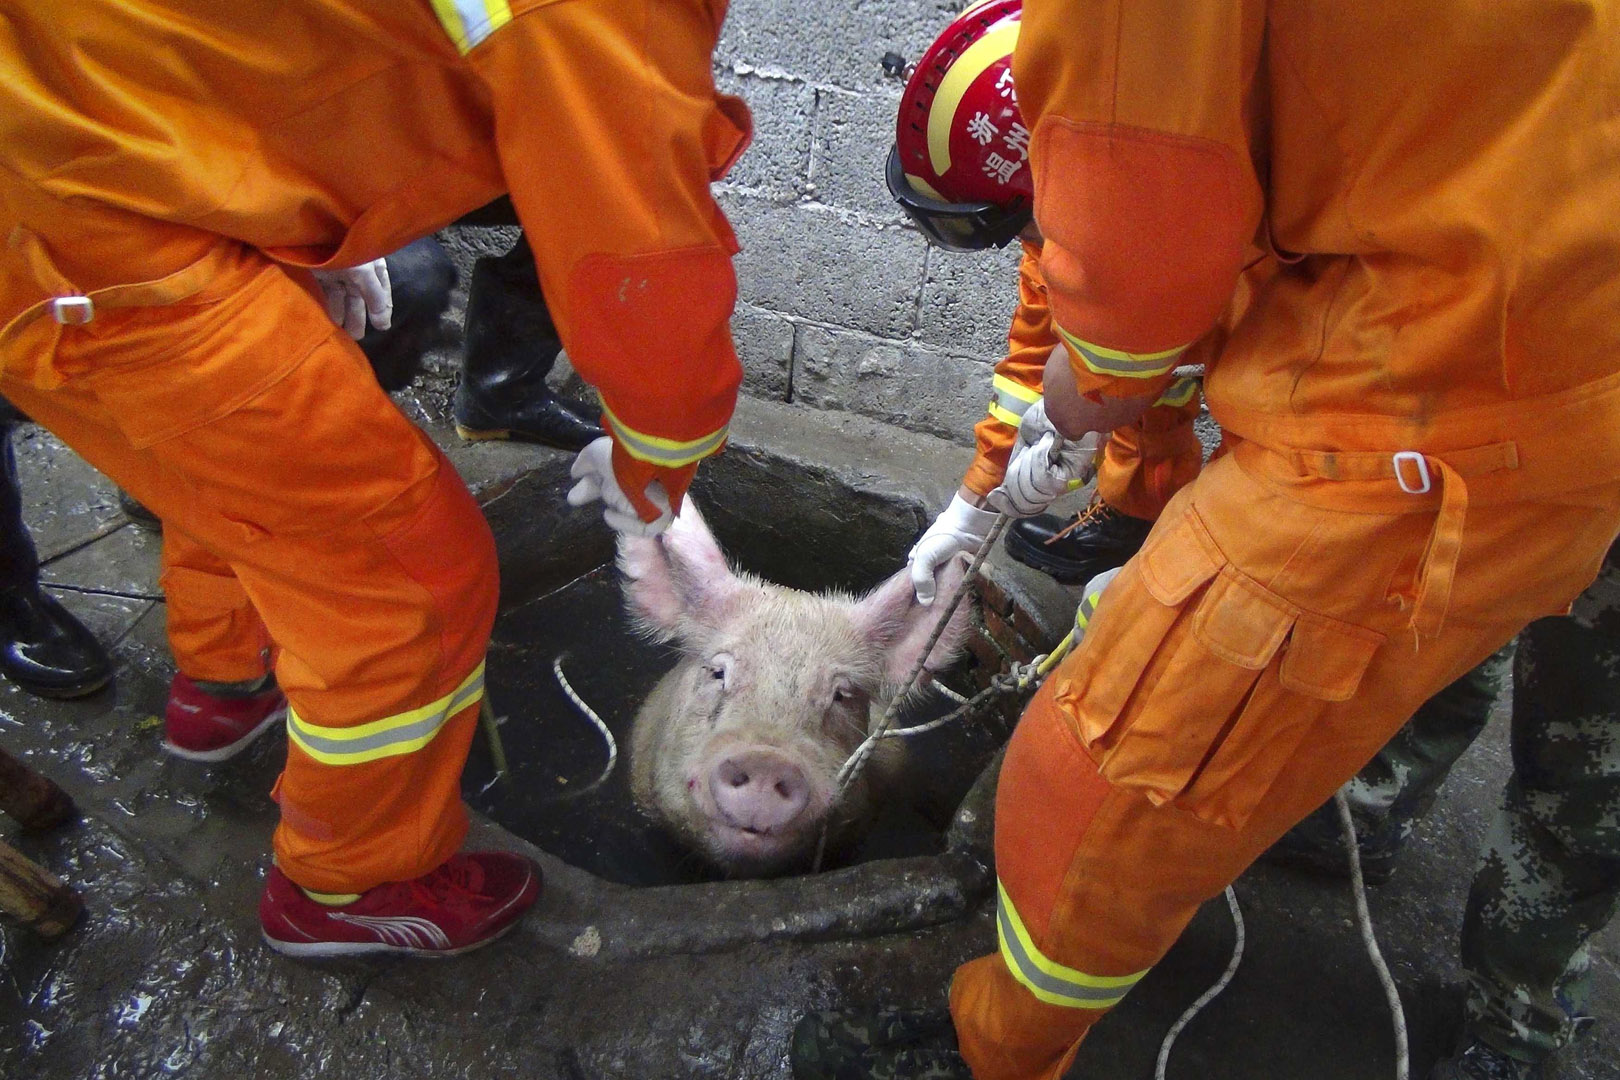 Firefighters pull a pig out of a well in China. It took seven firefighters to lift the 661 pound animal.